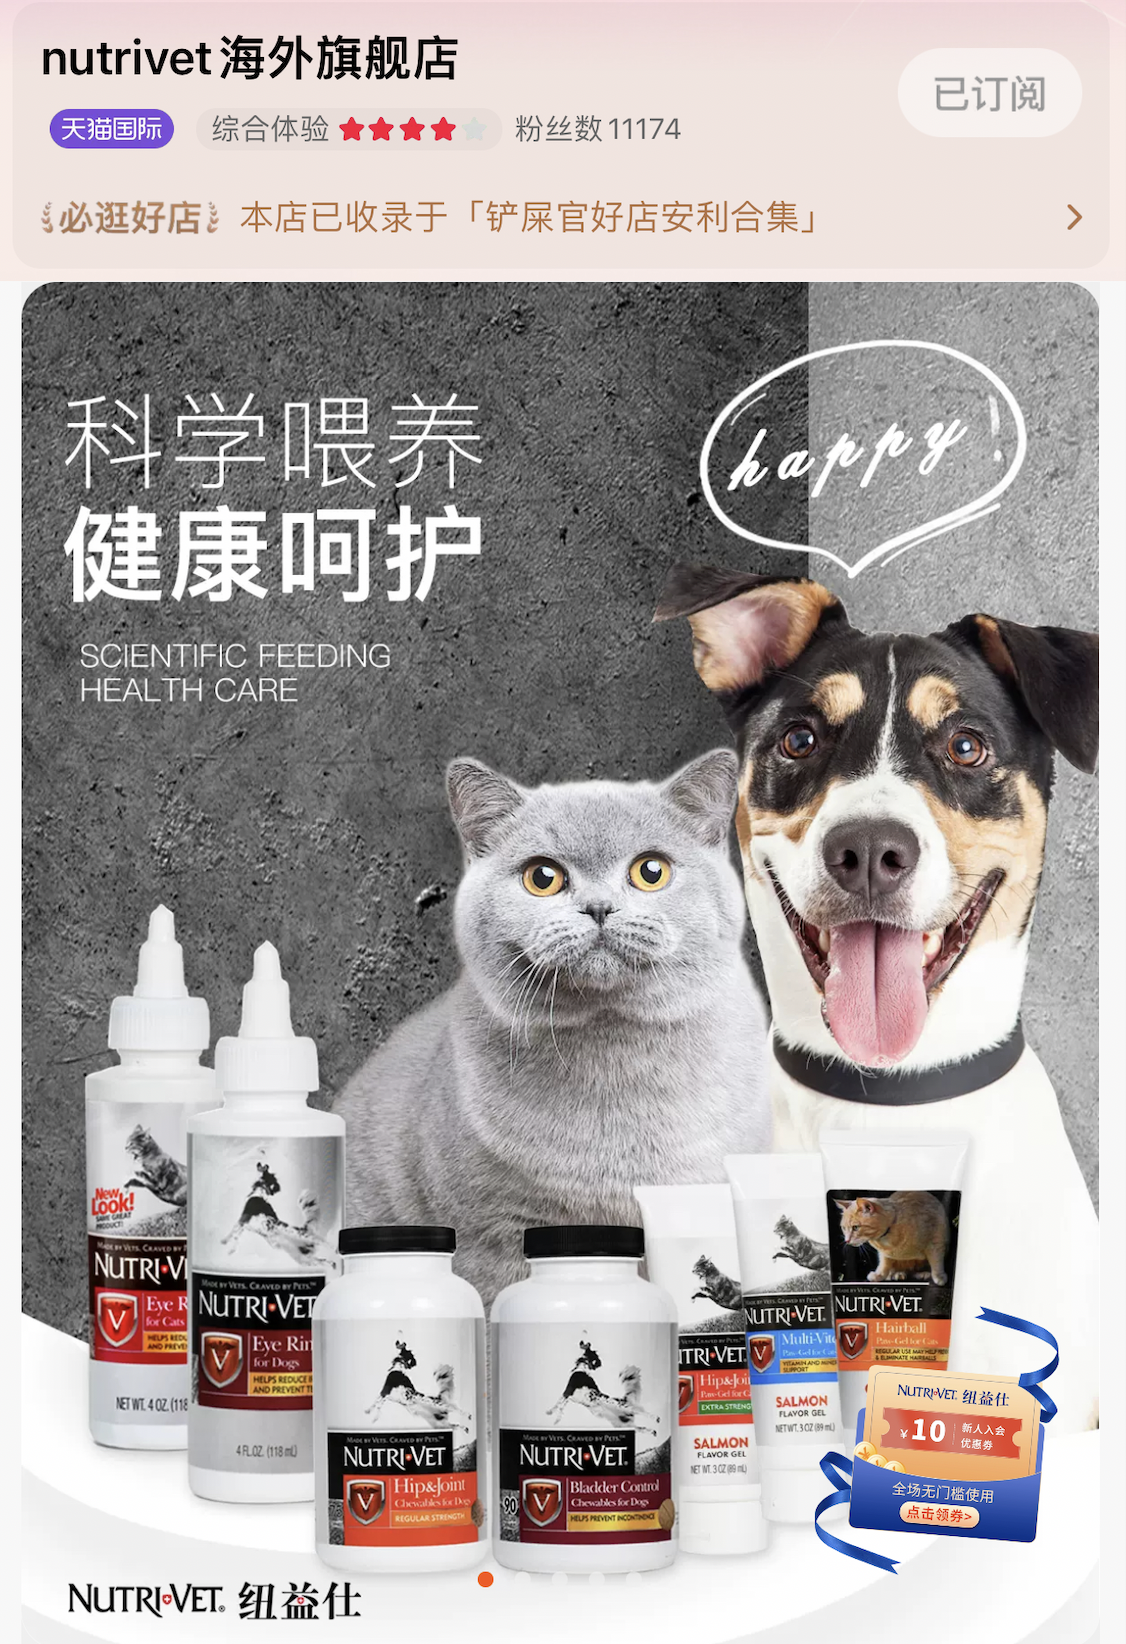 The Nutri-Vet flagship store is now positioned as Top Category of Supplements on Tmall Global platform, gaining significant traffic and growth